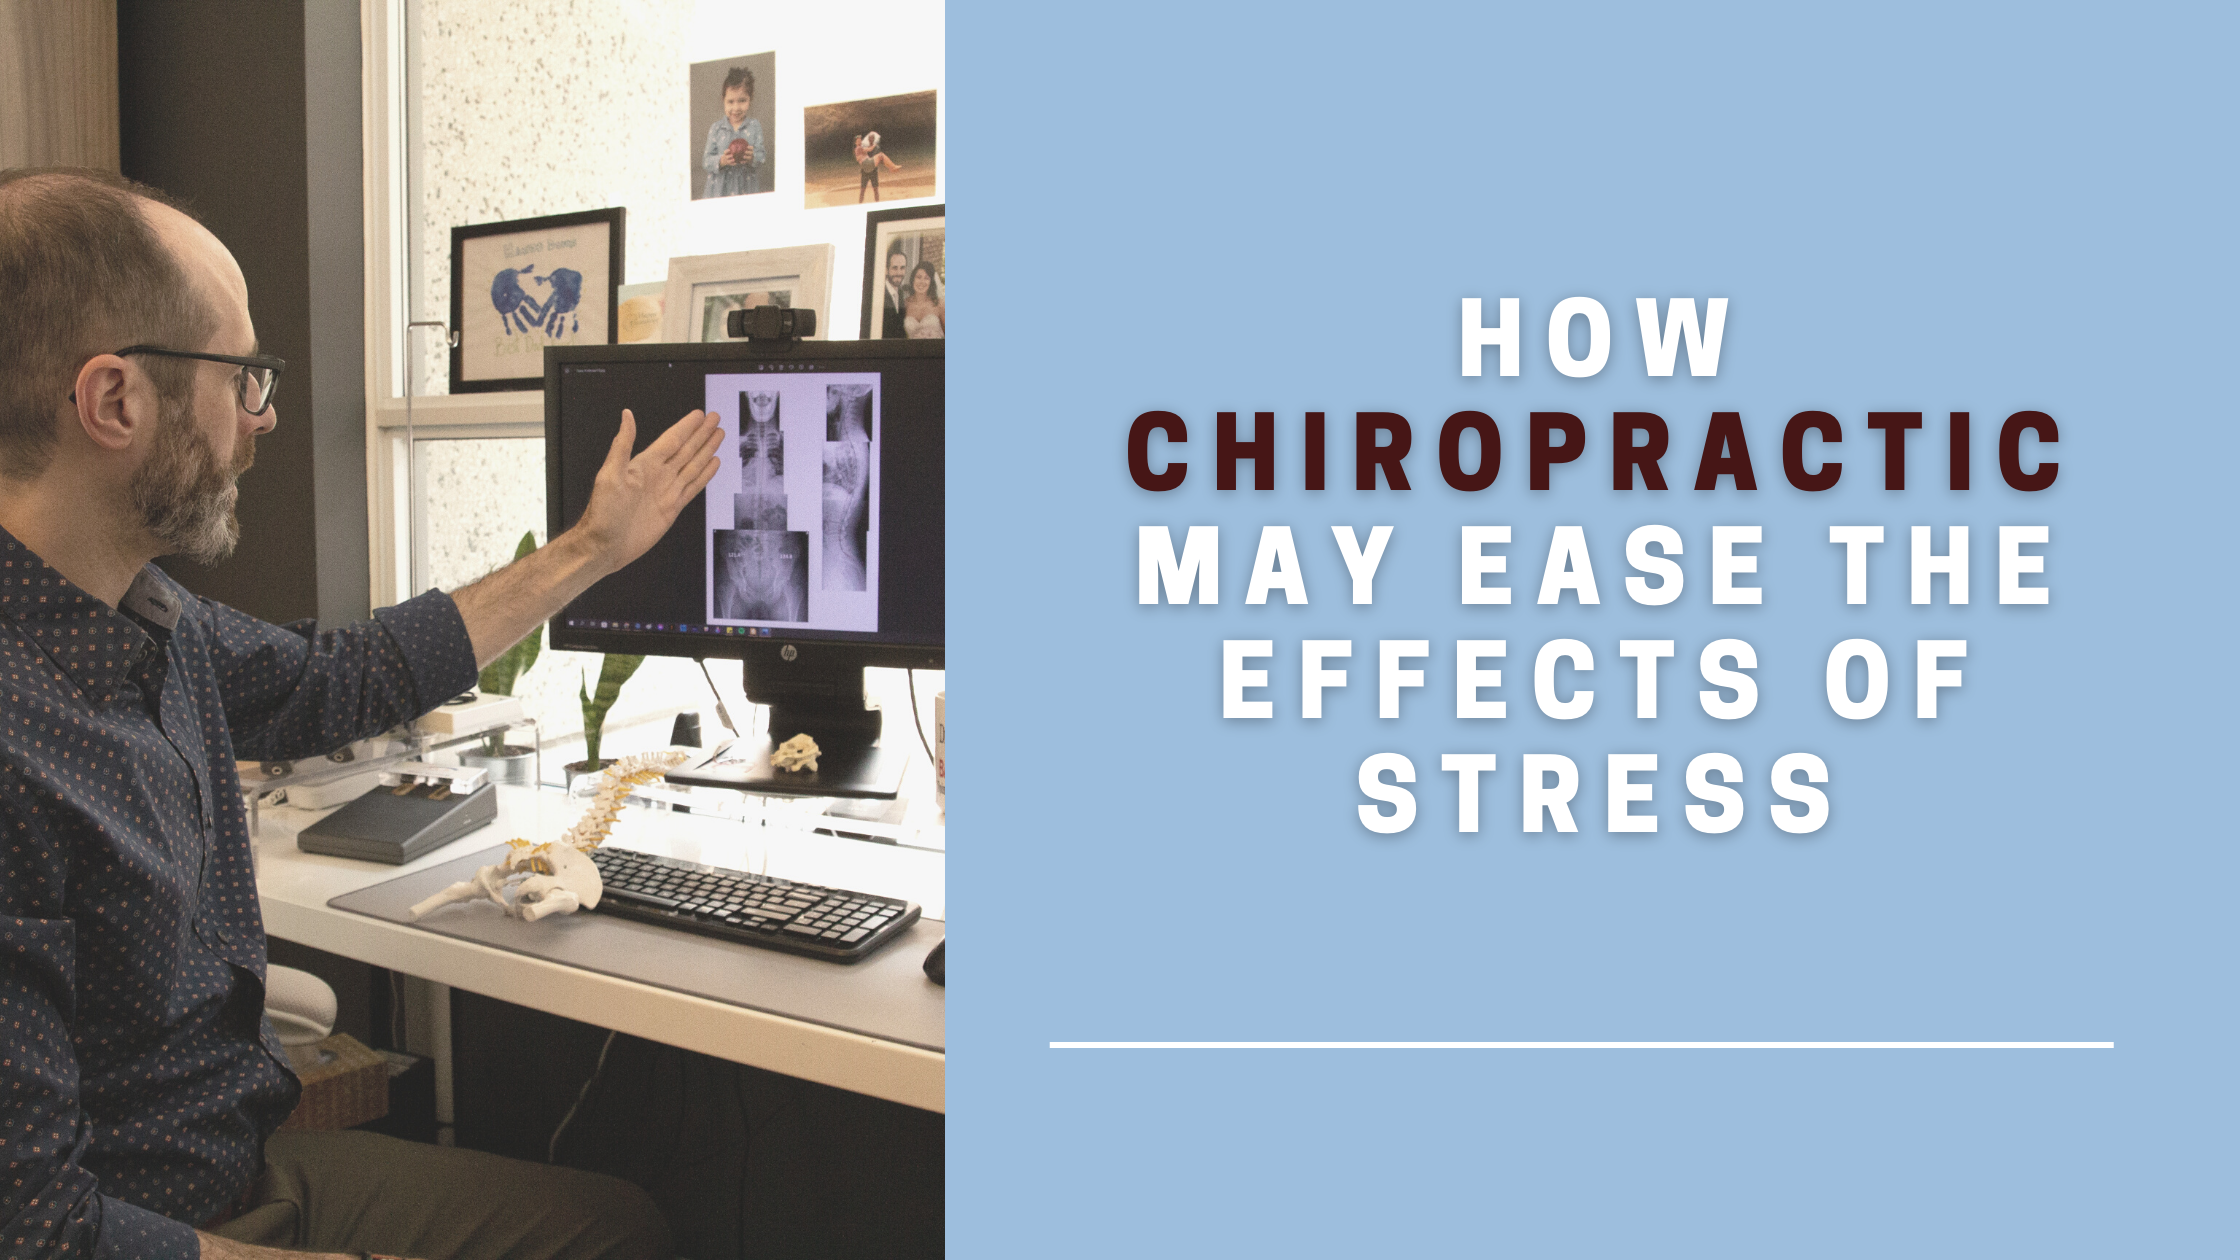 toronto chiropractor dr. joshua gelber pointing to an x-ray on a screen words How Chiropractic May Ease the Effects of Stress